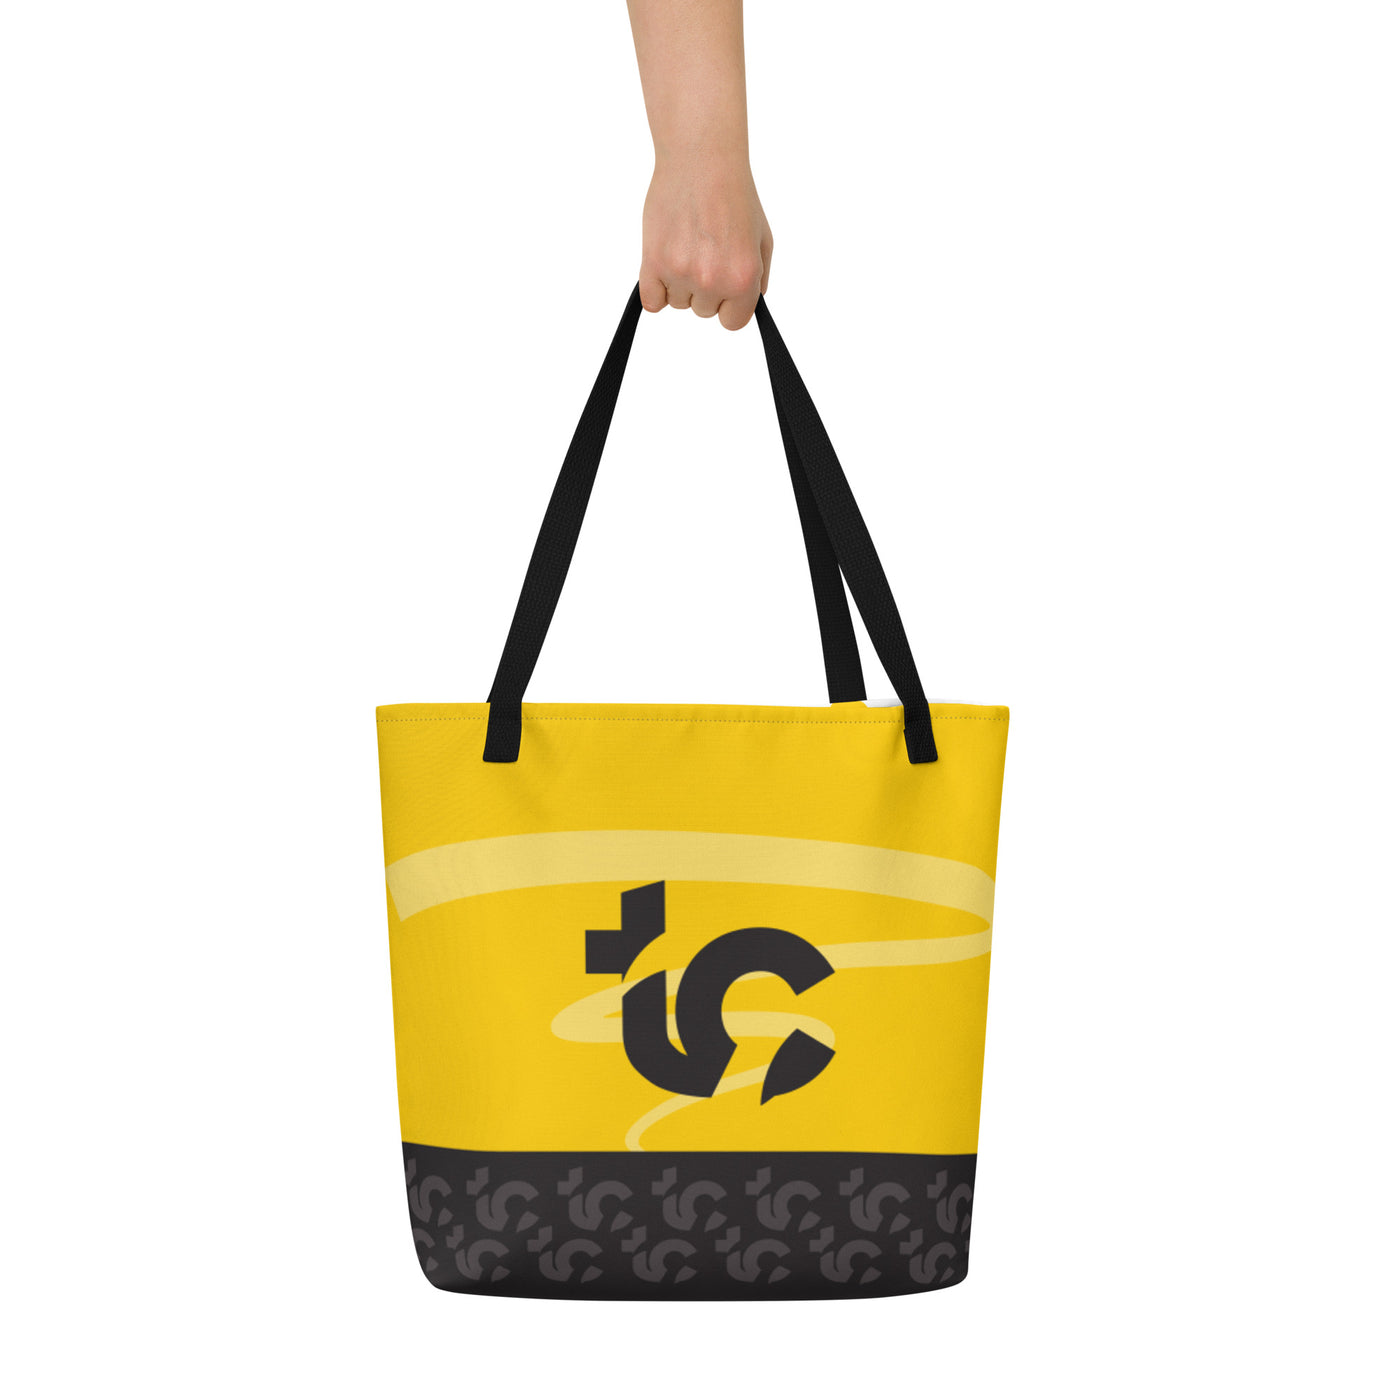 The Creatives Flagship All-Over Print Large Tote Bag